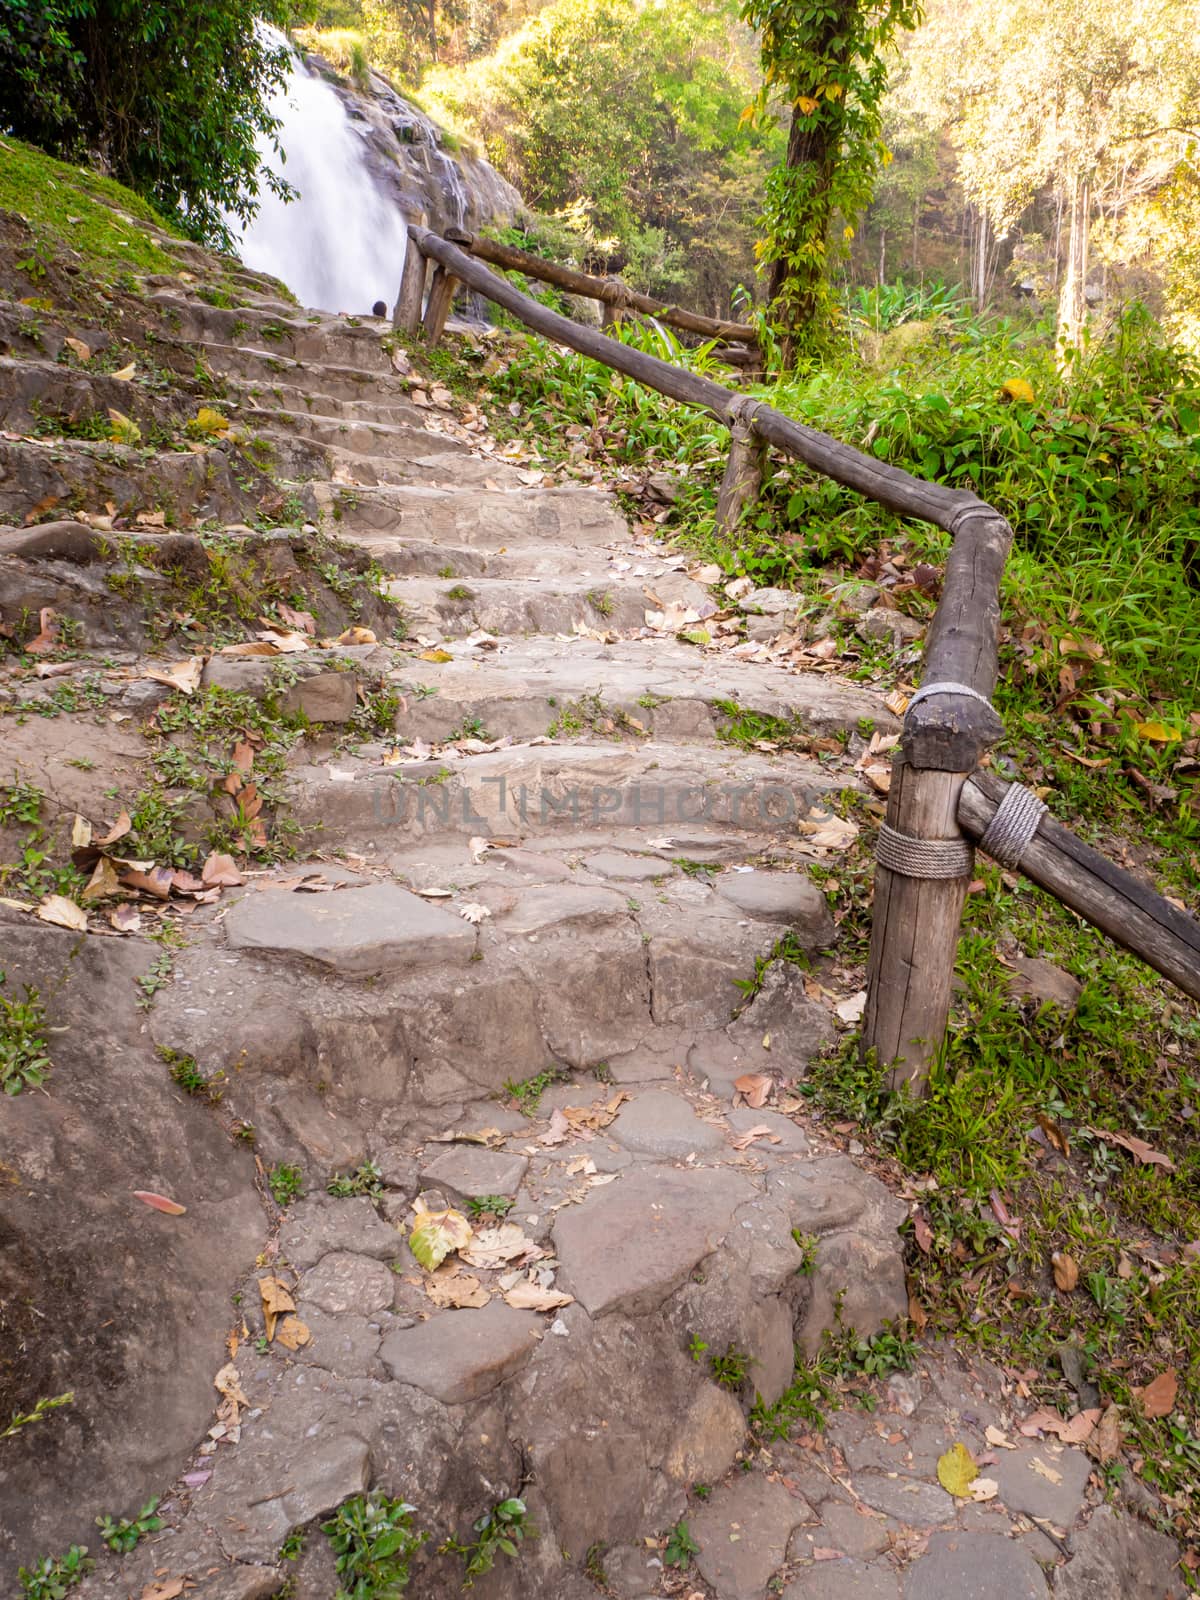 Old stone staircase, walkway steps on the mountain trail.